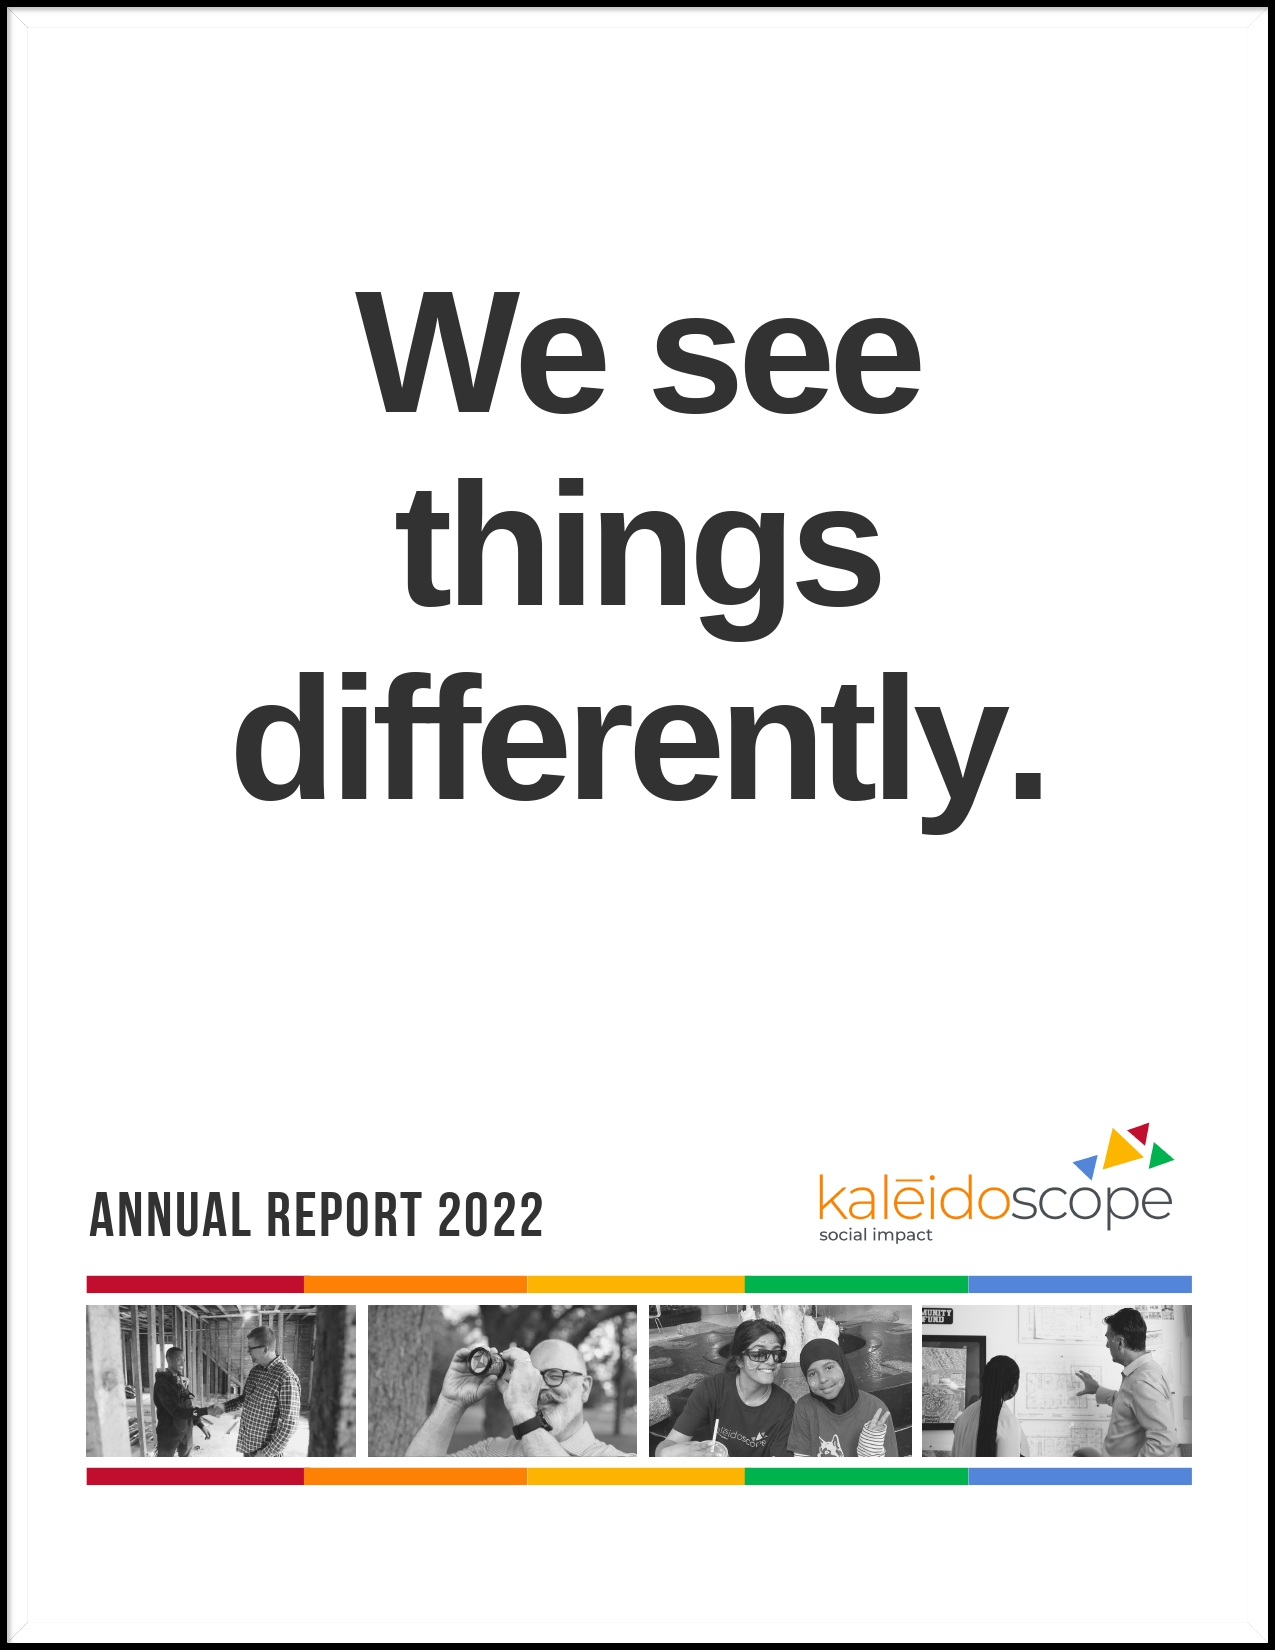 Our 2022 Annual Report